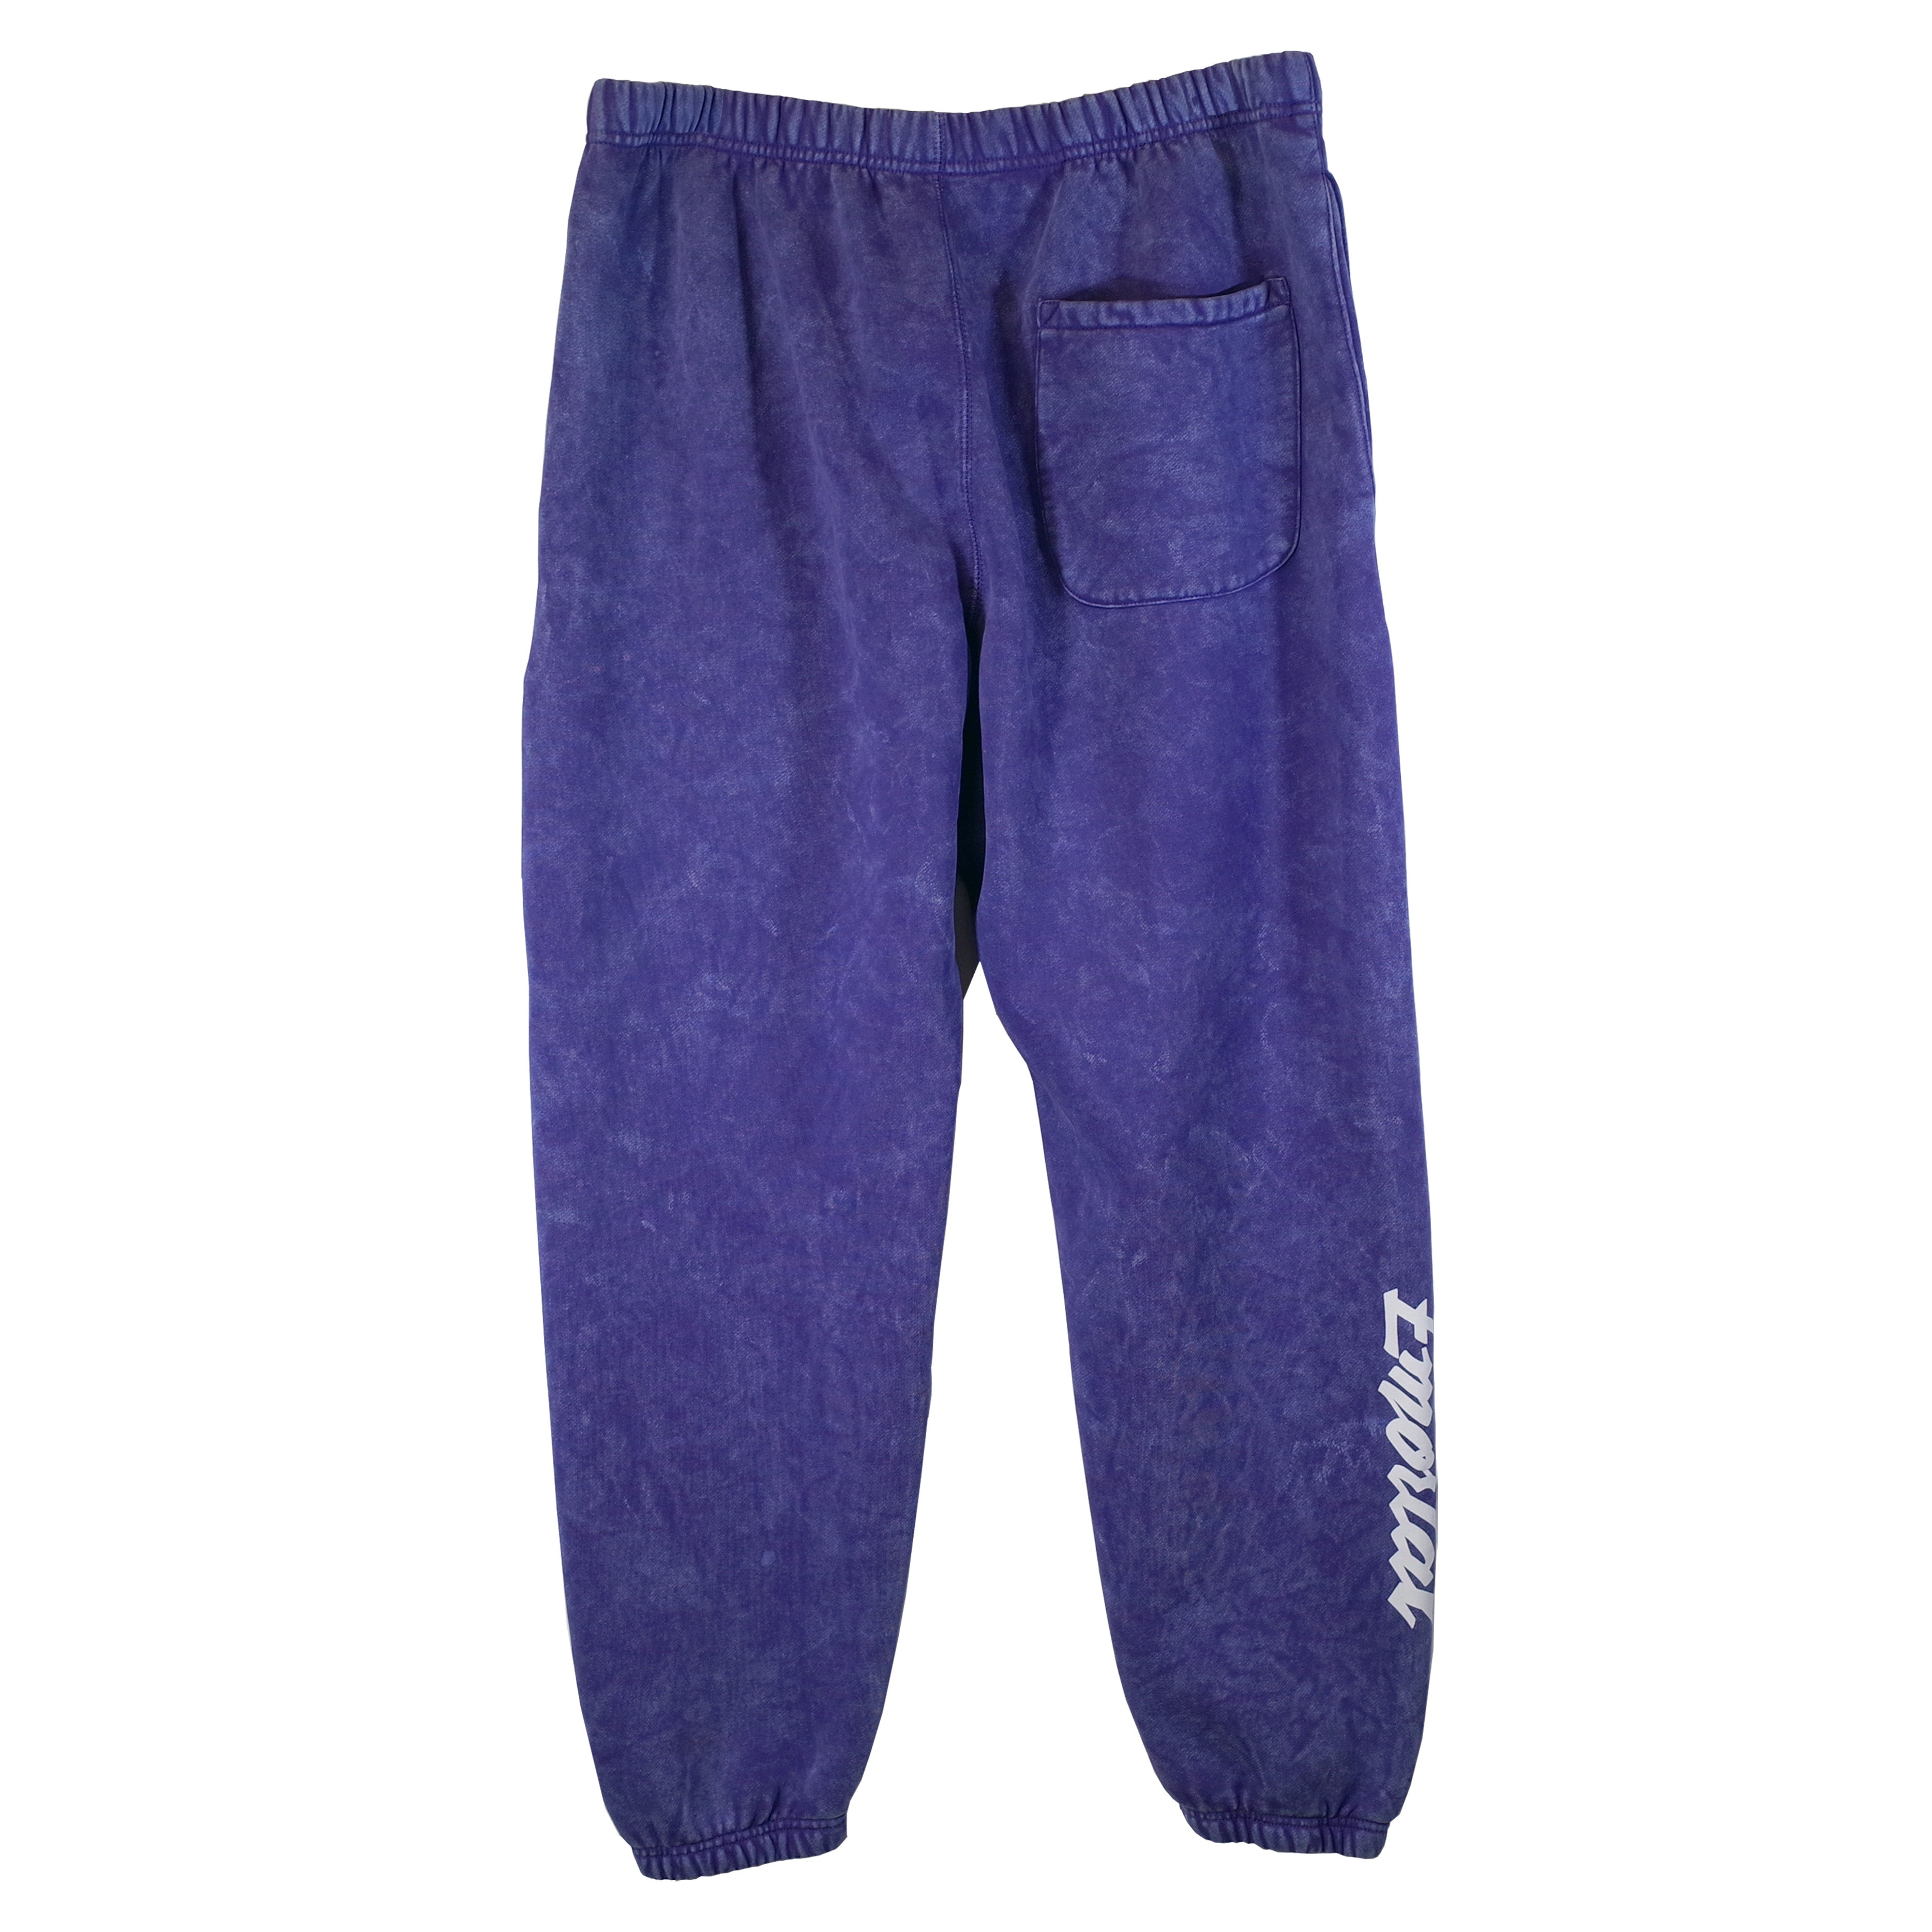 Our super comfy sweatpants feature logo embroidery and print. We dyed & mineral-washed our joggers a dark purple (powdered ube color) for that new vintage look.   Our dyed sweatpants feature a crotch gusset and a zipped stash pocket. Made of a 14 oz 80/20 cotton-poly blend, with side ribbings. The fit is slightly oversized and pre-shrunk.   Each dyed hoodie & sweatpants is unique and may look slightly different than pictured.